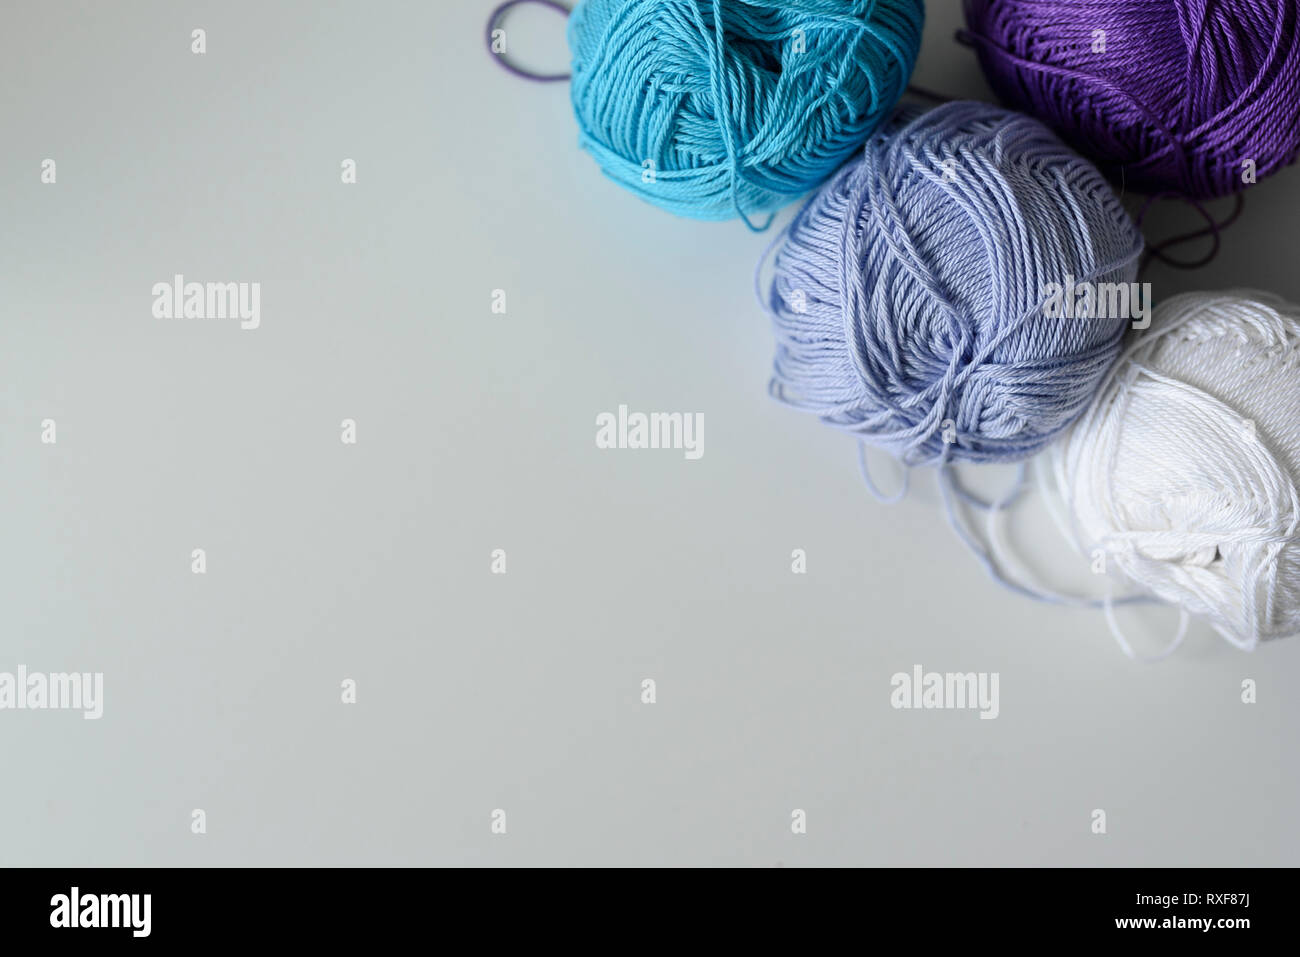 Creative decoration of colorful knitting wools for handmade on white table with copy space. Stock Photo